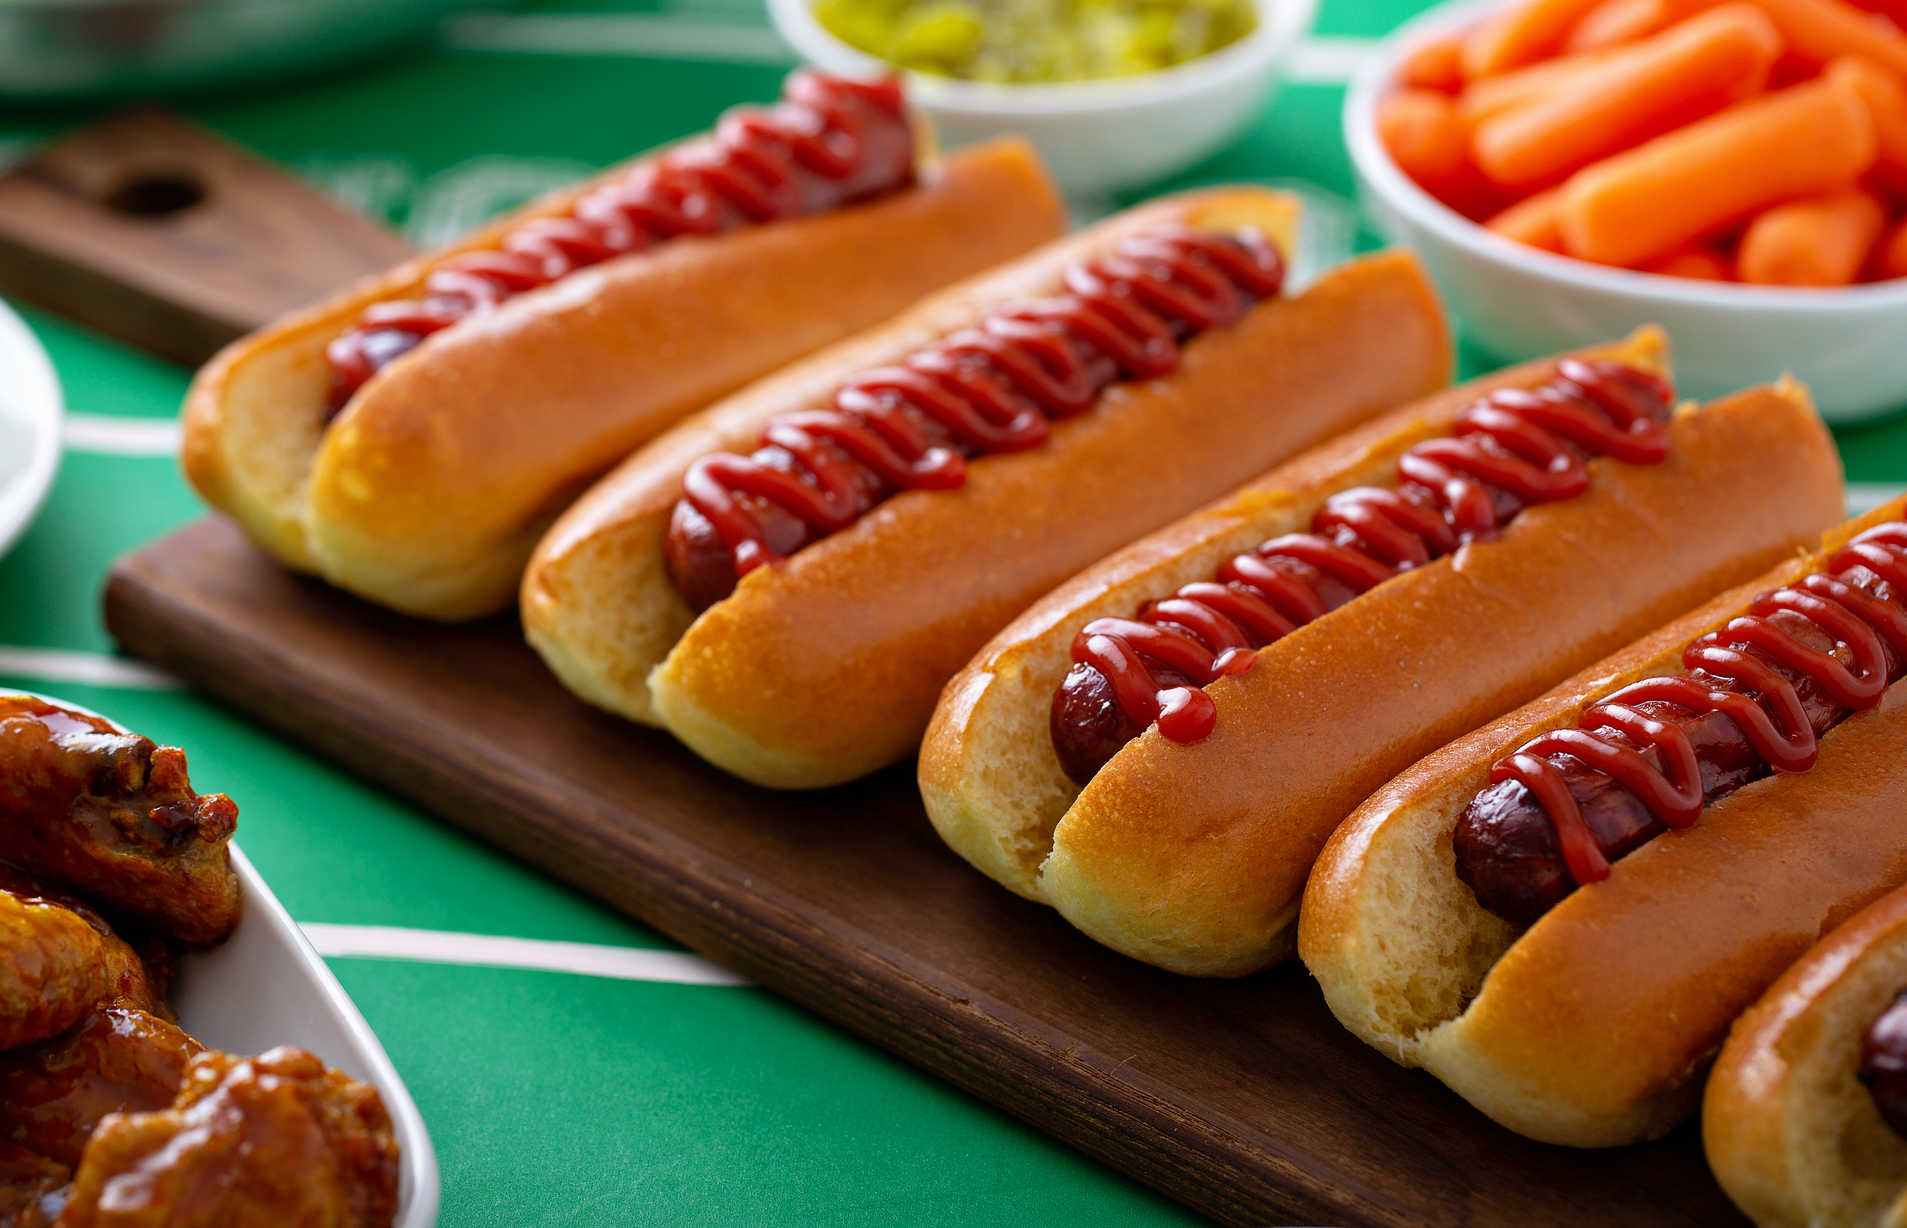 The Price of Hot Dogs At NFL Stadiums in 2021-2022